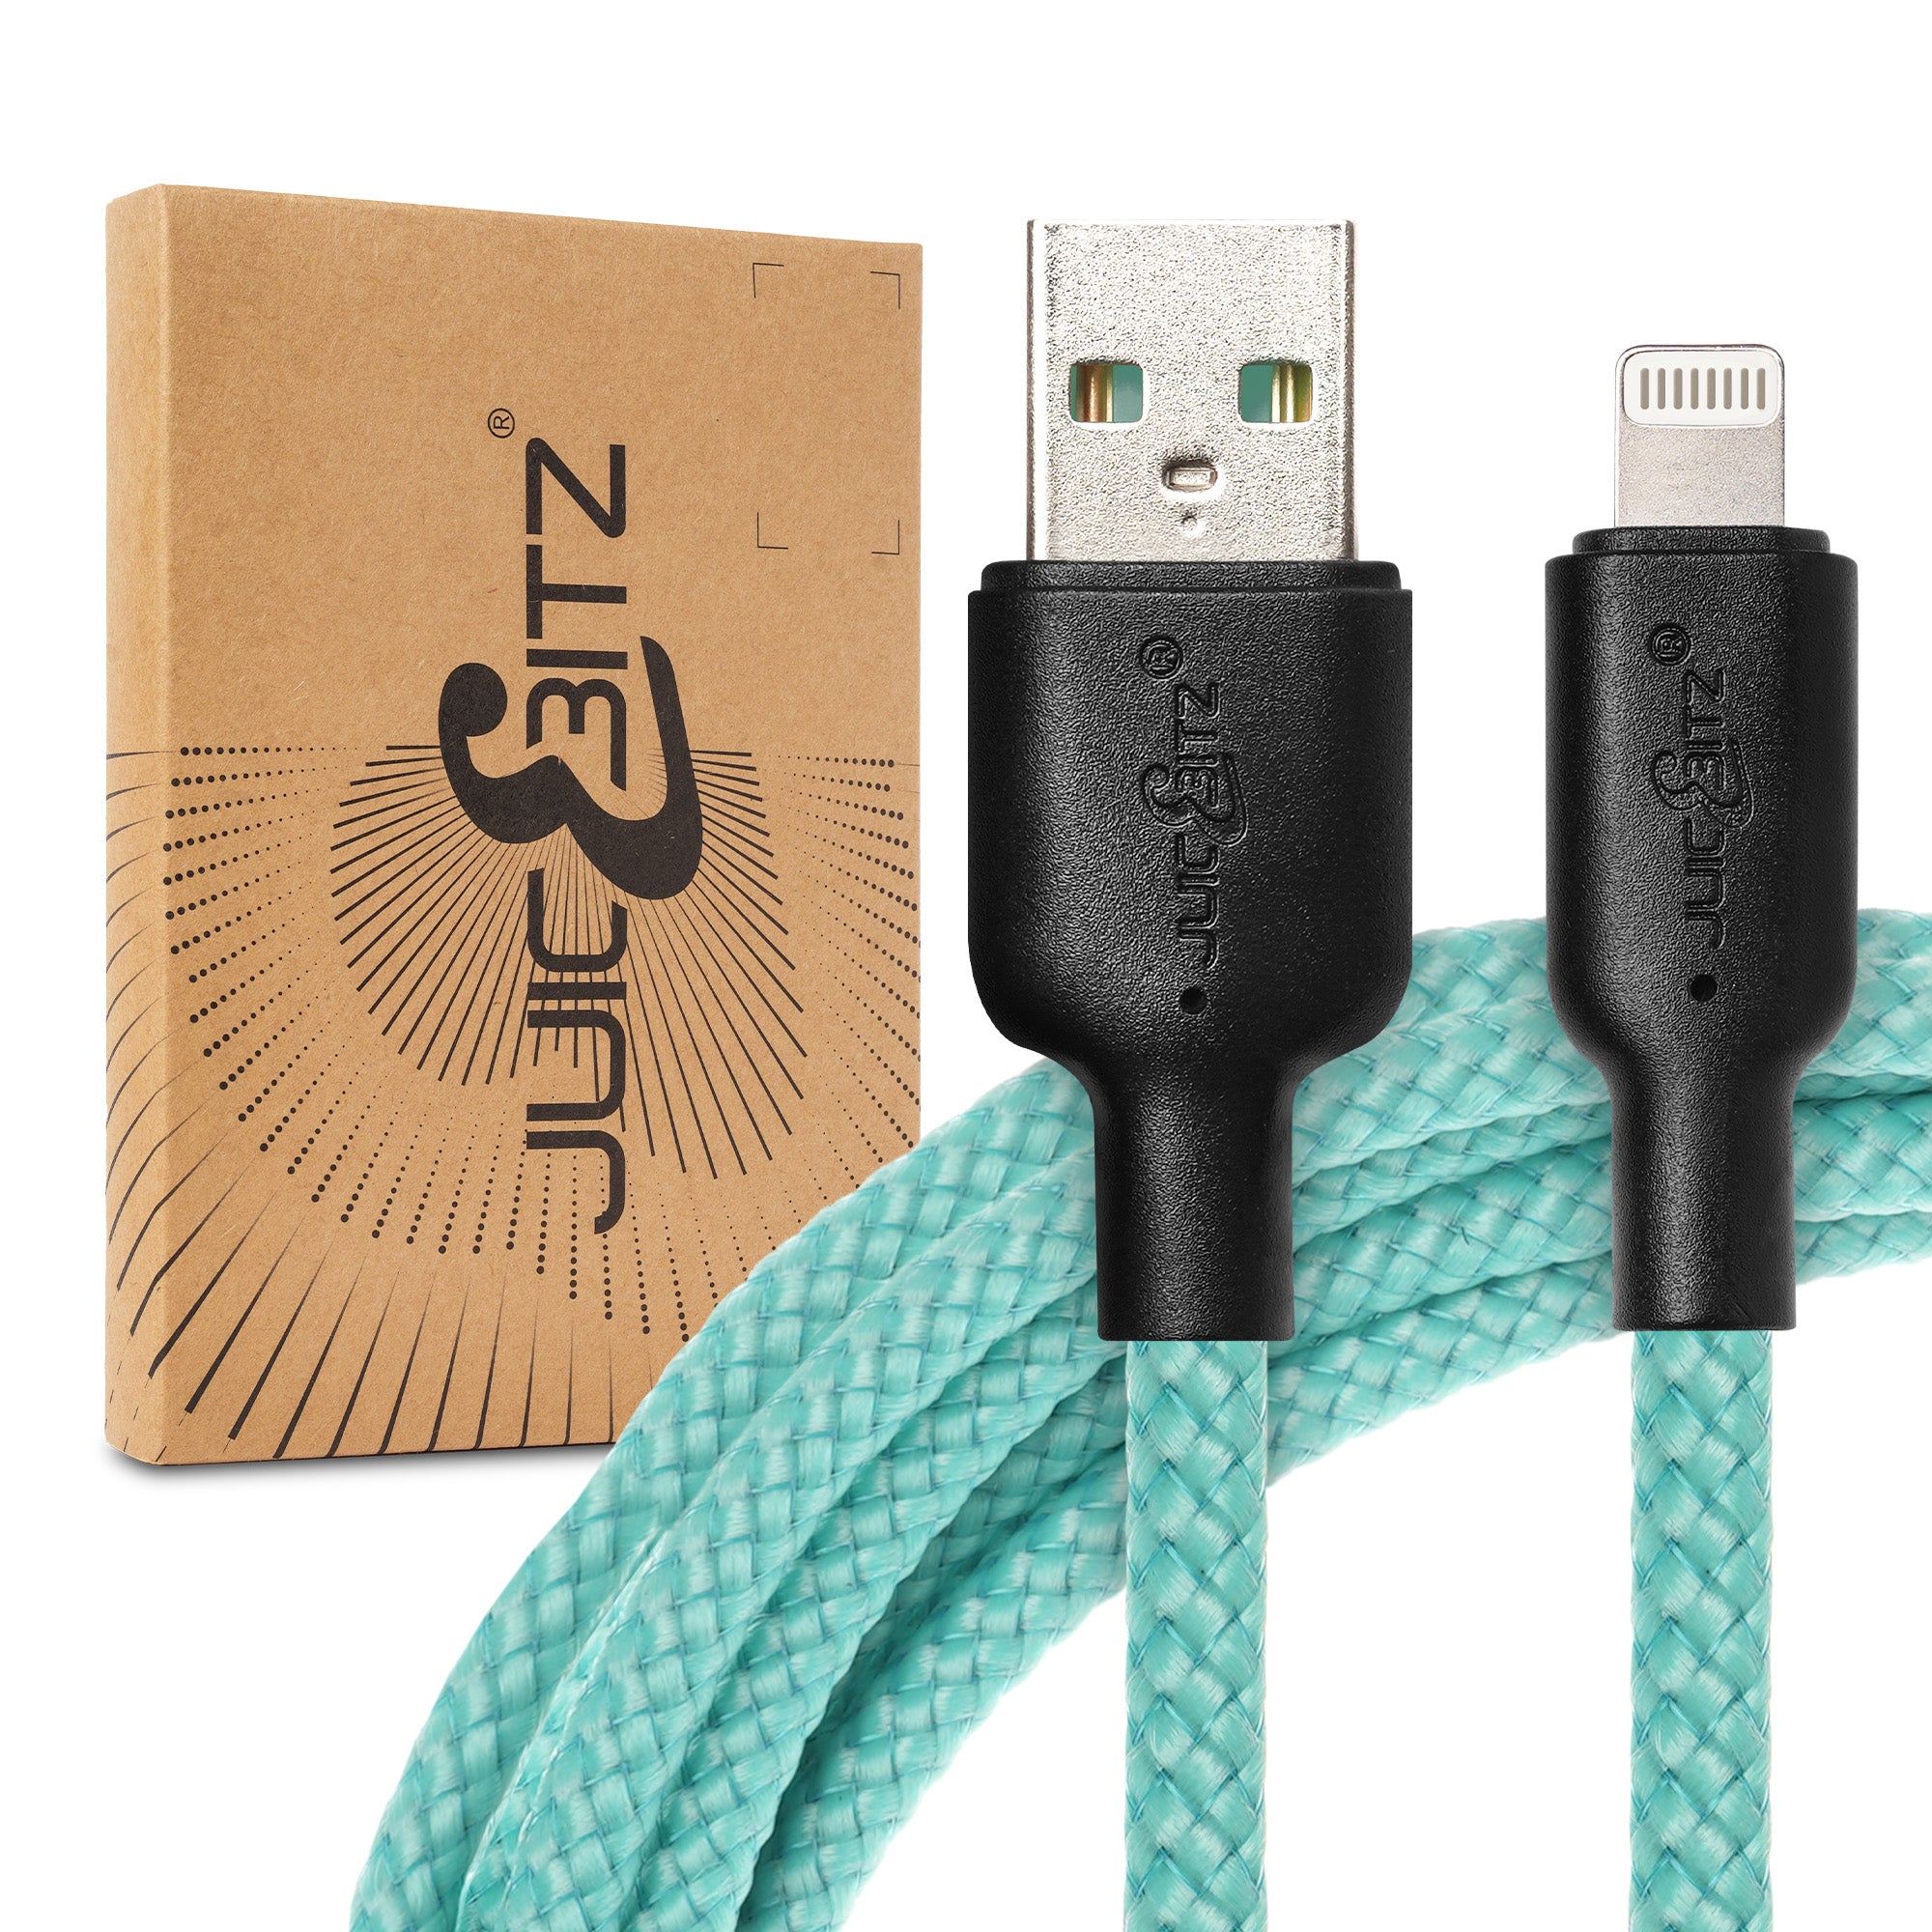 Braided Heavy Duty USB Charger Cable Data Sync Wire Lead for iPhone, iPad, iPod - Turquoise